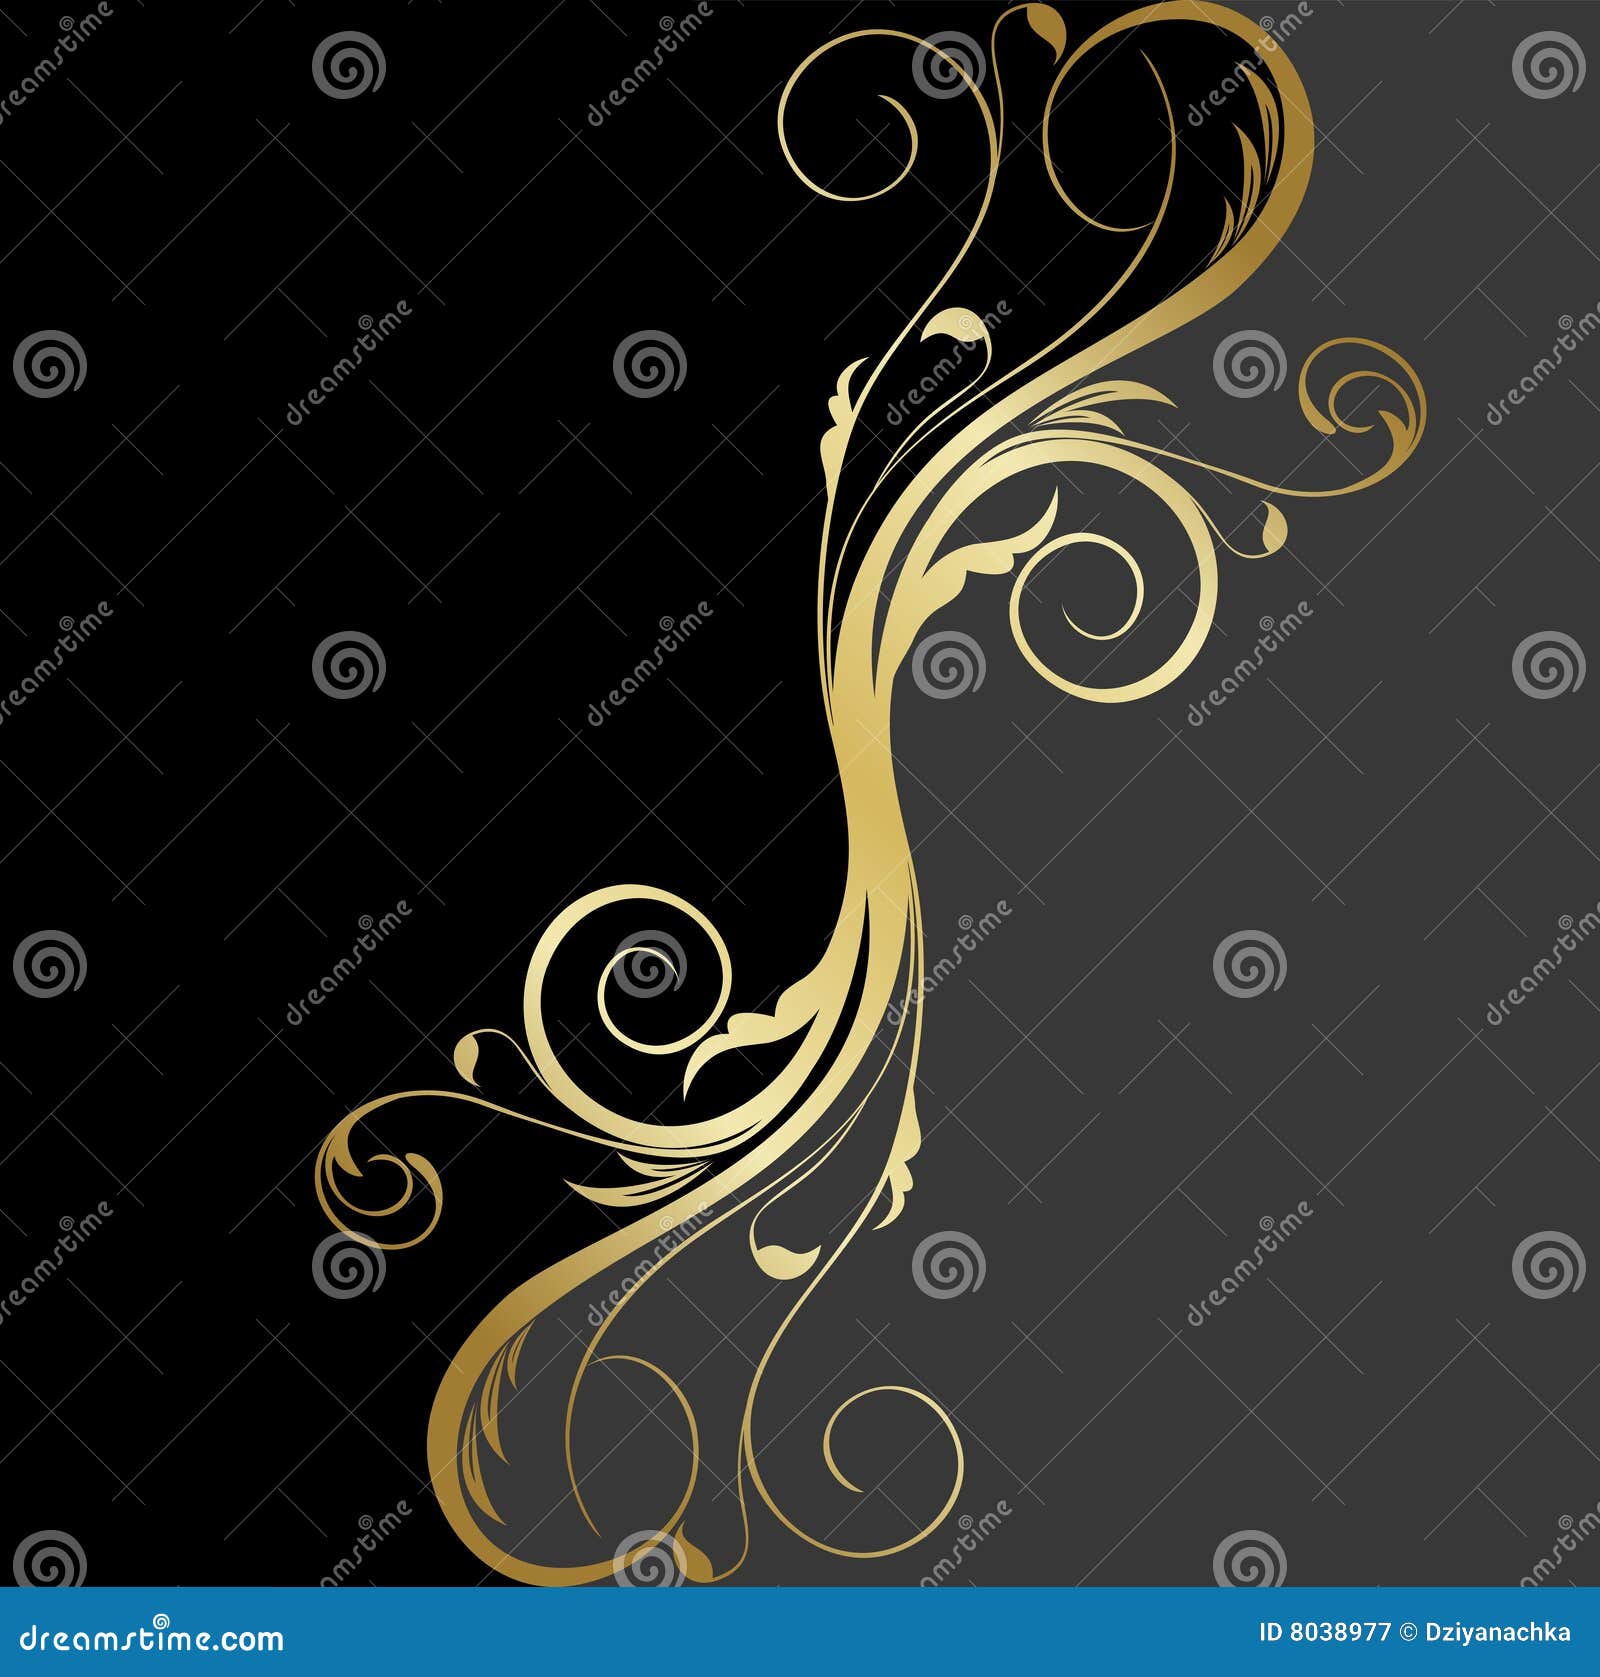 Black And Gold Floral Background Royalty Free Stock Photography - Image